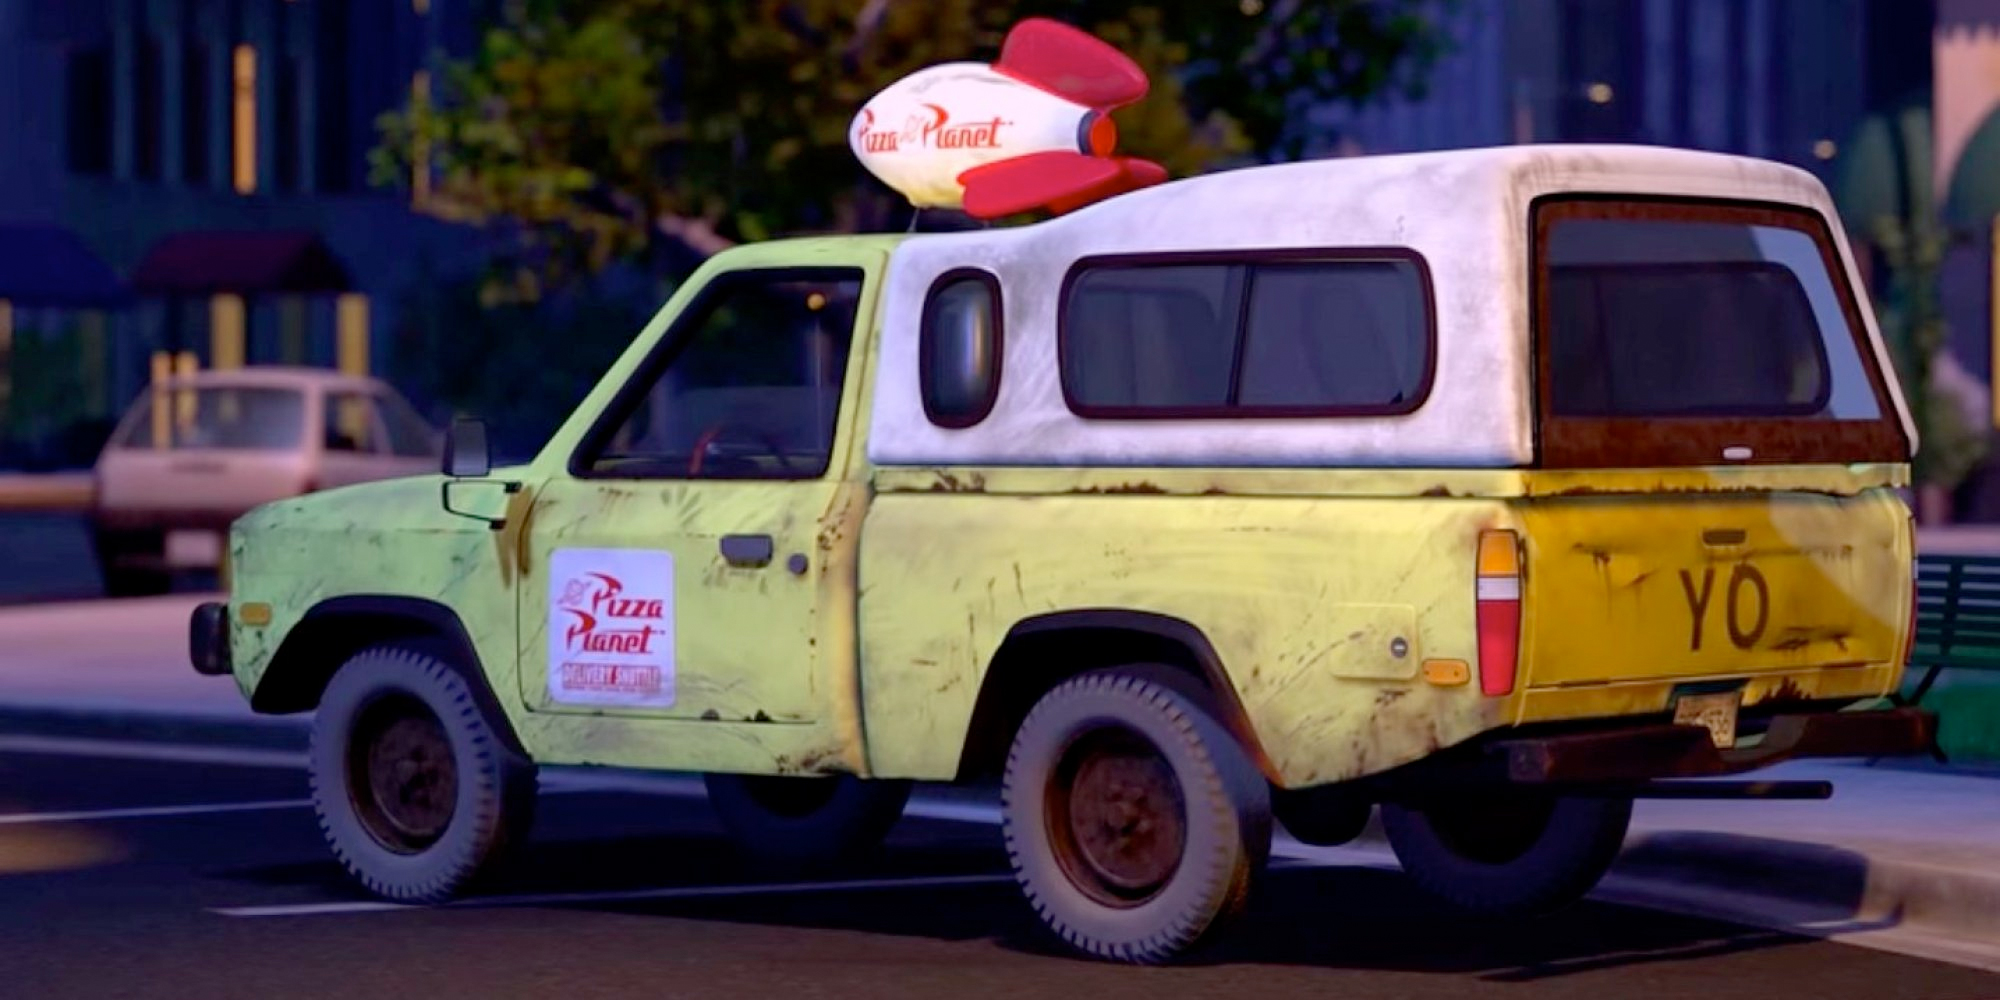 POTD: Is This the Pizza Planet Truck in The Good Dinosaur?